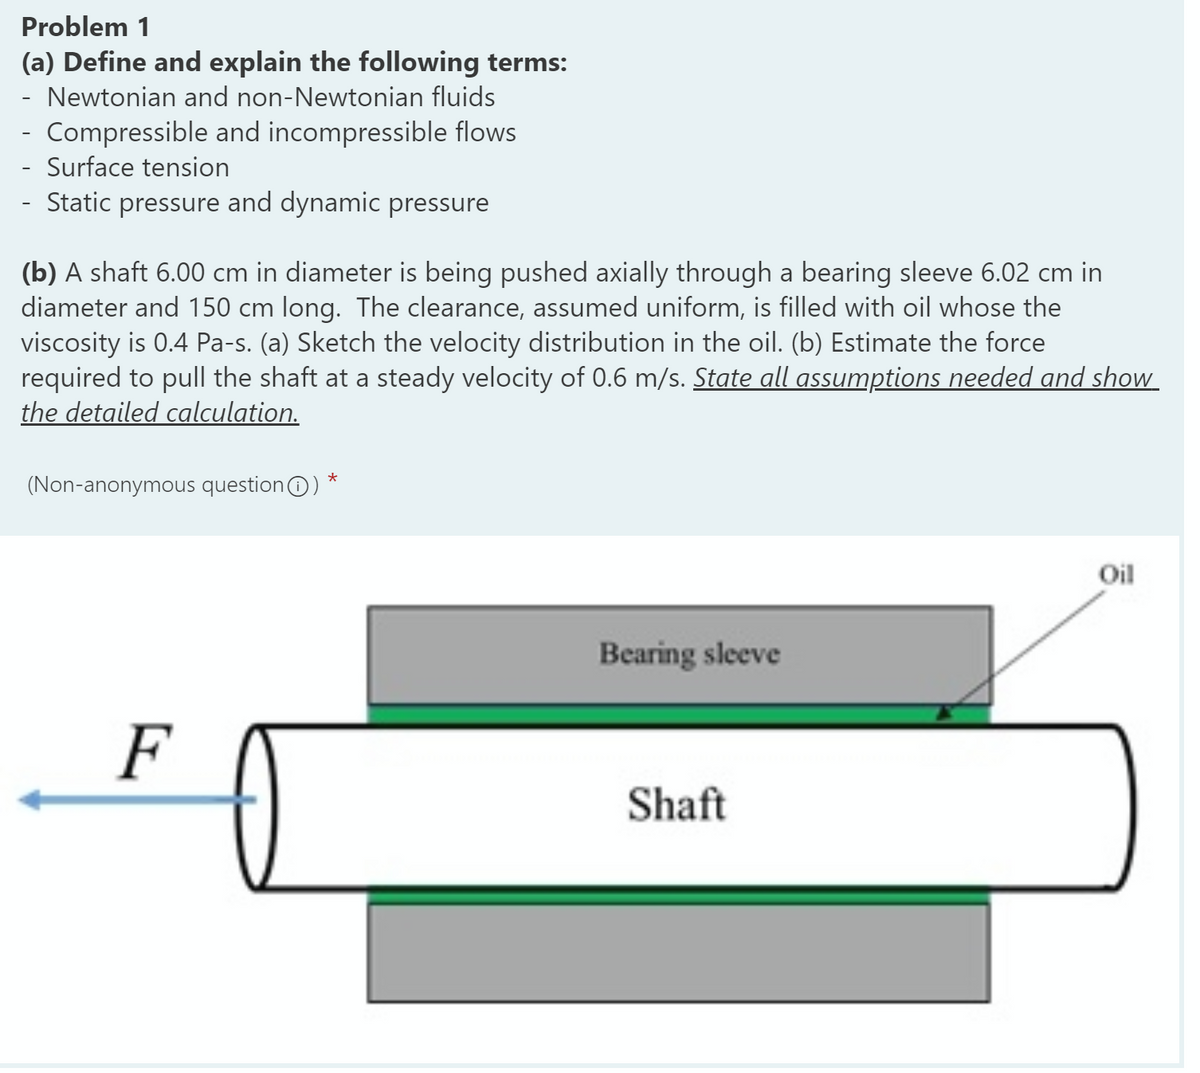 Problem 1
(a) Define and explain the following terms:
Newtonian and non-Newtonian fluids
- Compressible and incompressible flows
- Surface tension
- Static pressure and dynamic pressure
(b) A shaft 6.00 cm in diameter is being pushed axially through a bearing sleeve 6.02 cm in
diameter and 150 cm long. The clearance, assumed uniform, is filled with oil whose the
viscosity is 0.4 Pa-s. (a) Sketch the velocity distribution in the oil. (b) Estimate the force
required to pull the shaft at a steady velocity of 0.6 m/s. State all assumptions needed and show
the detailed calculation.
(Non-anonymous questionO)
Oil
Bearing sleeve
F
Shaft
